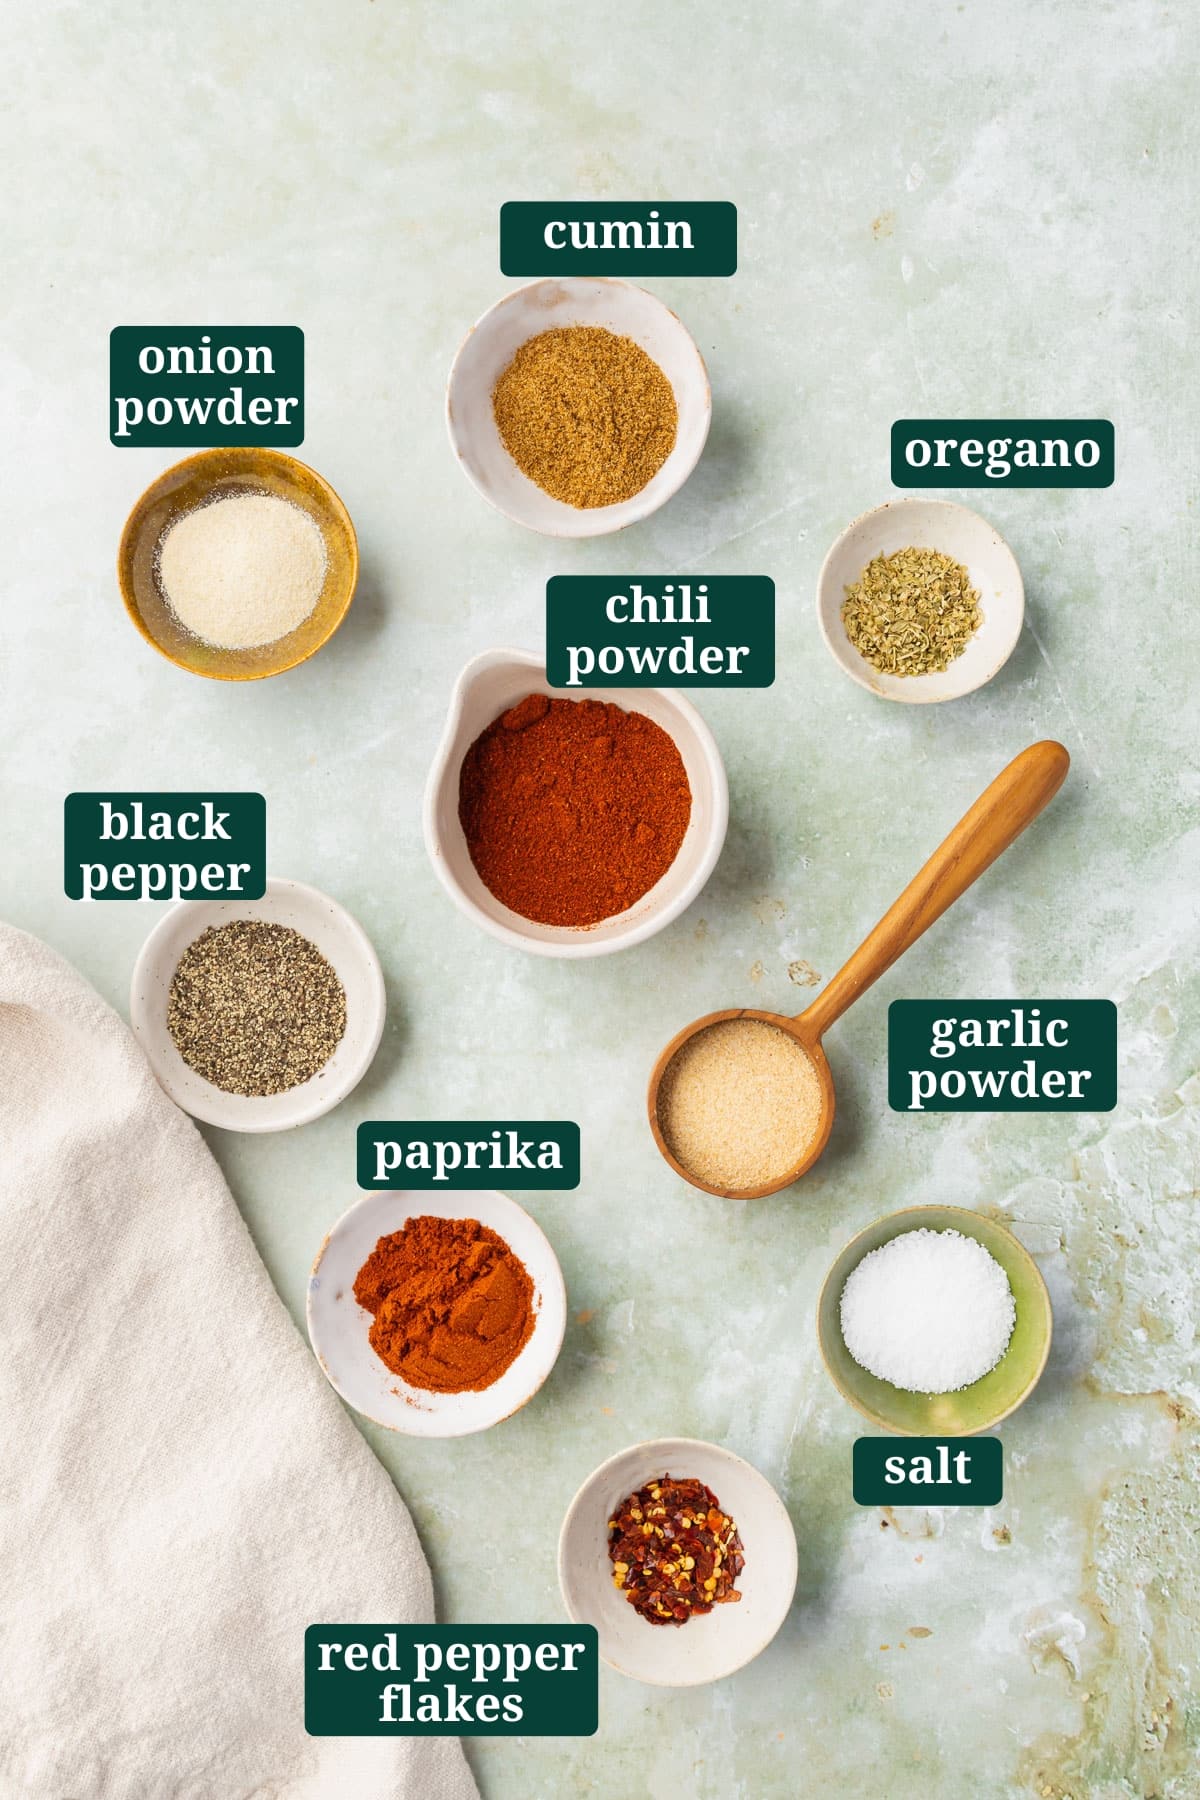 Ingredients in small bowls on a green marble table to make gluten-free taco seasoning, including cumin, onion powder, chili powder, oregano, black pepper, paprika, garlic powder, red pepper flakes and salt with text overlays over each ingredient.